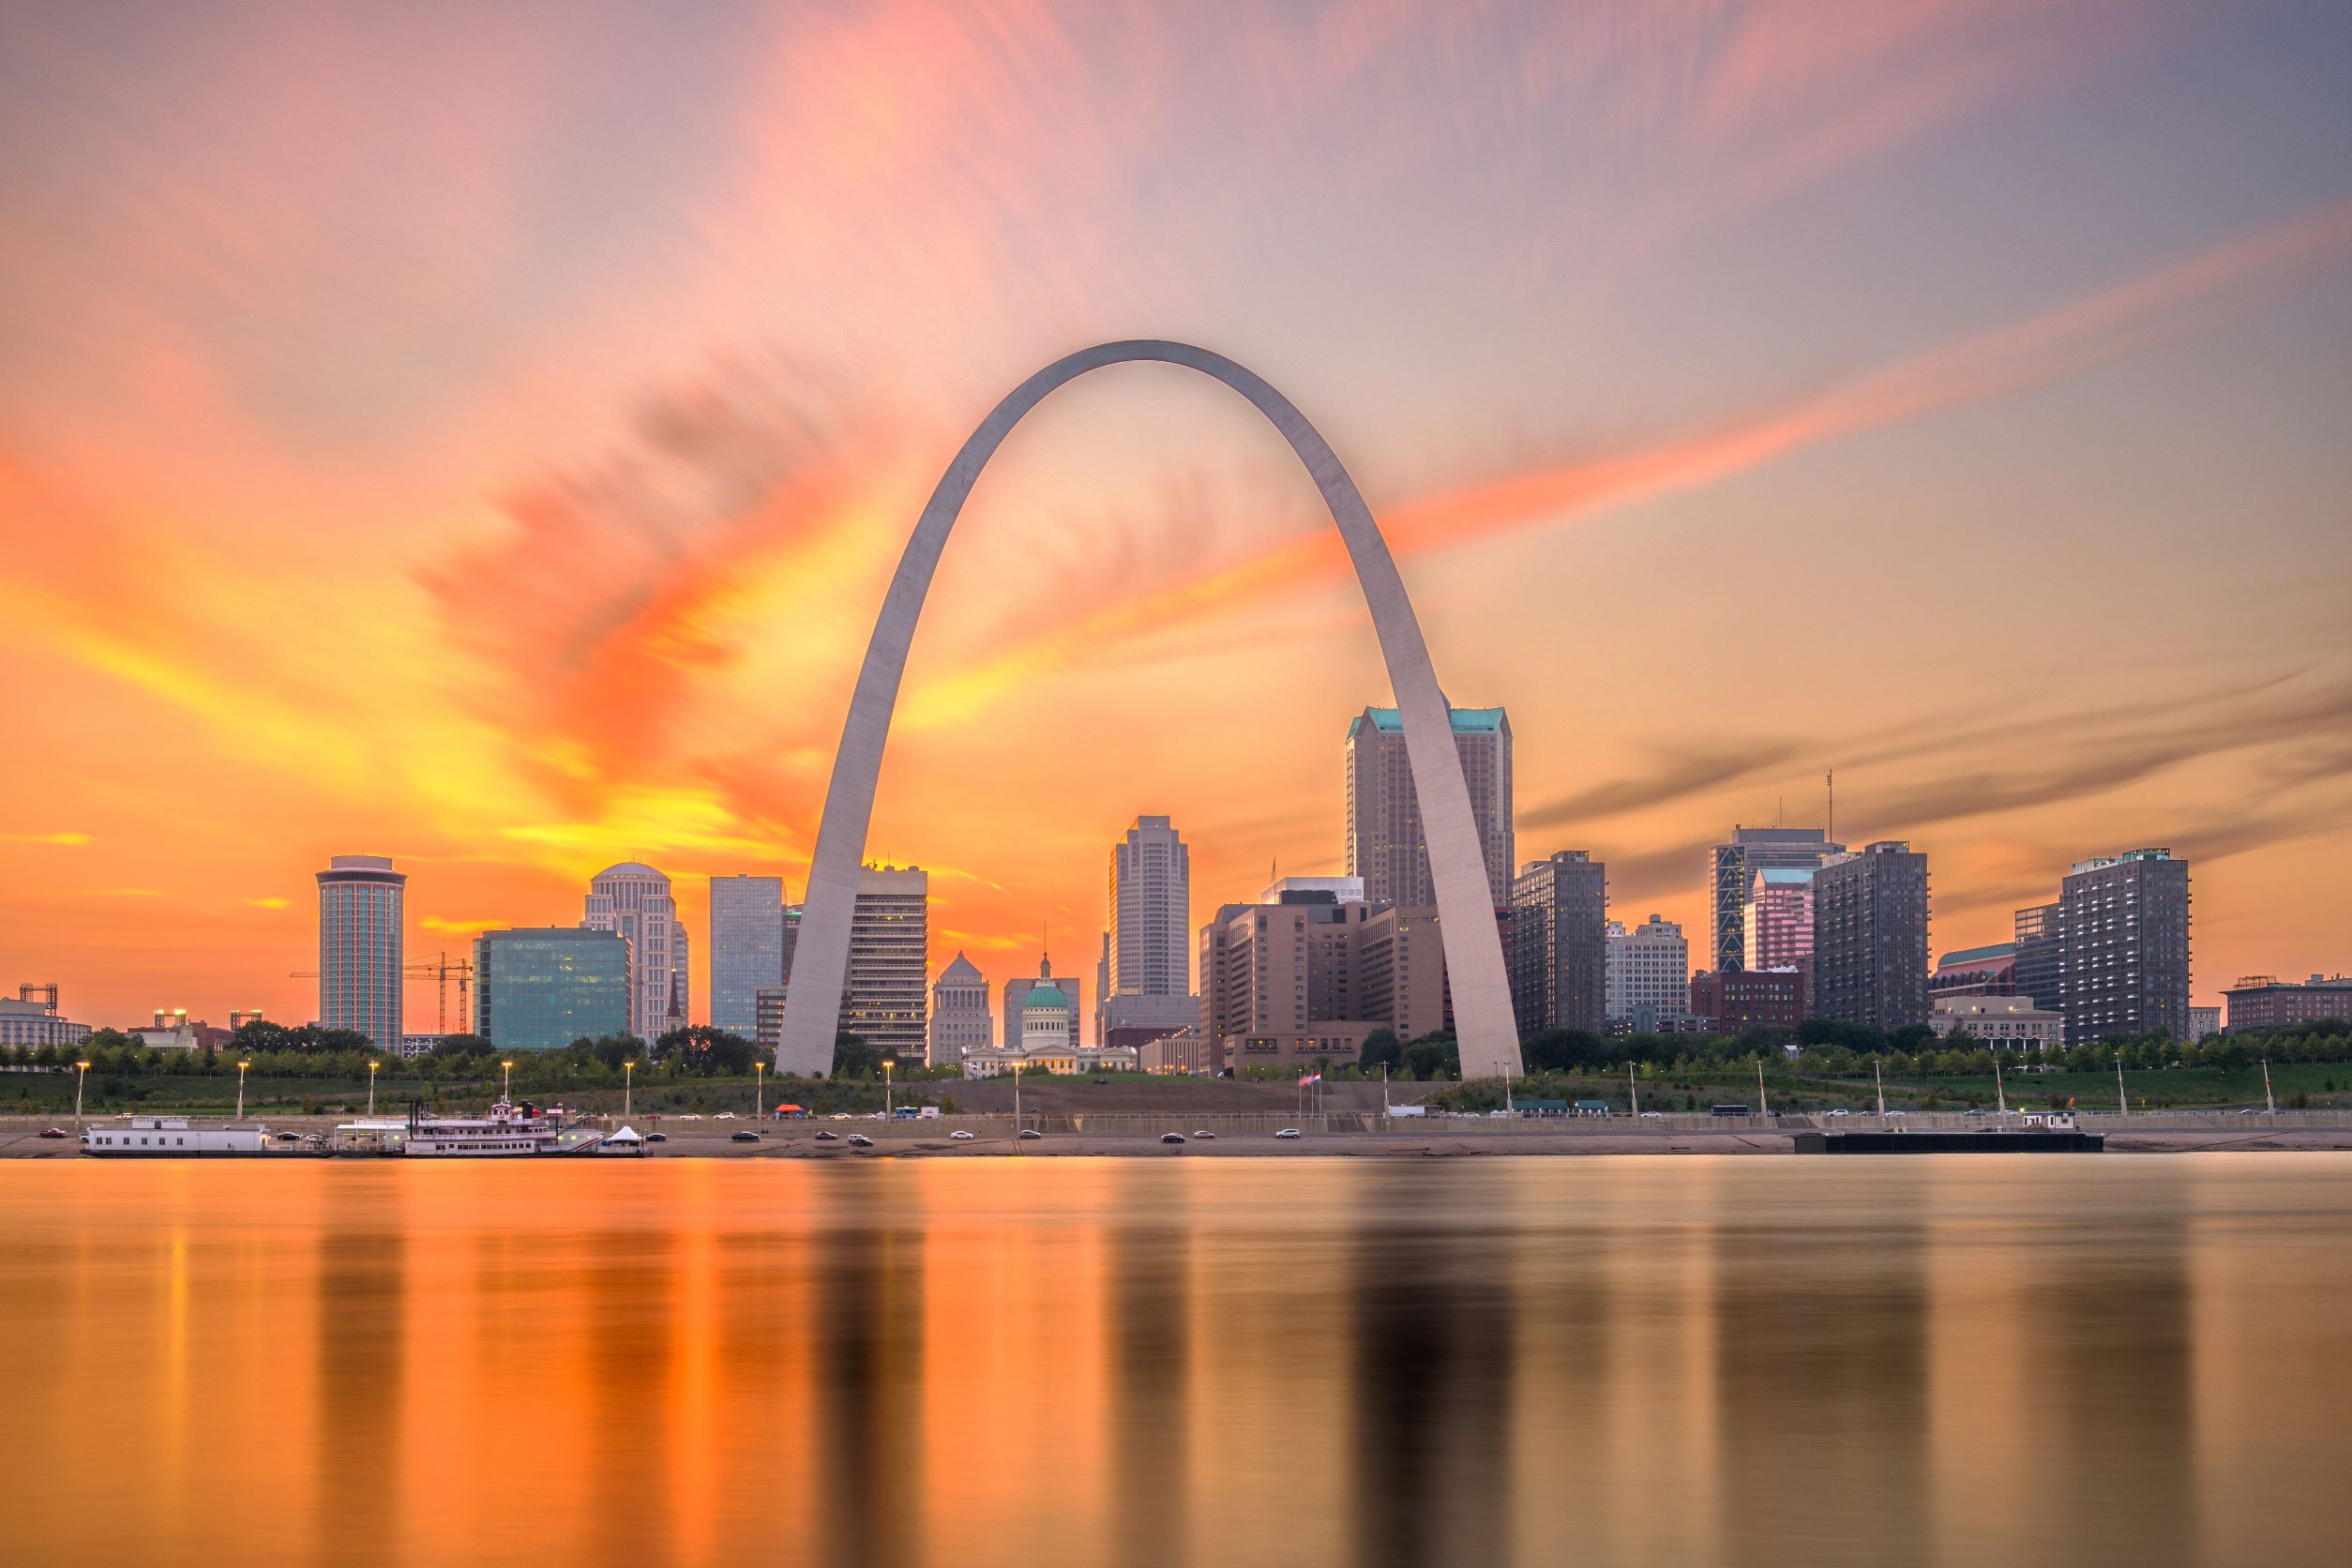 Gateway Arch in Missouri with sunset behind it and the Mississippi river in front